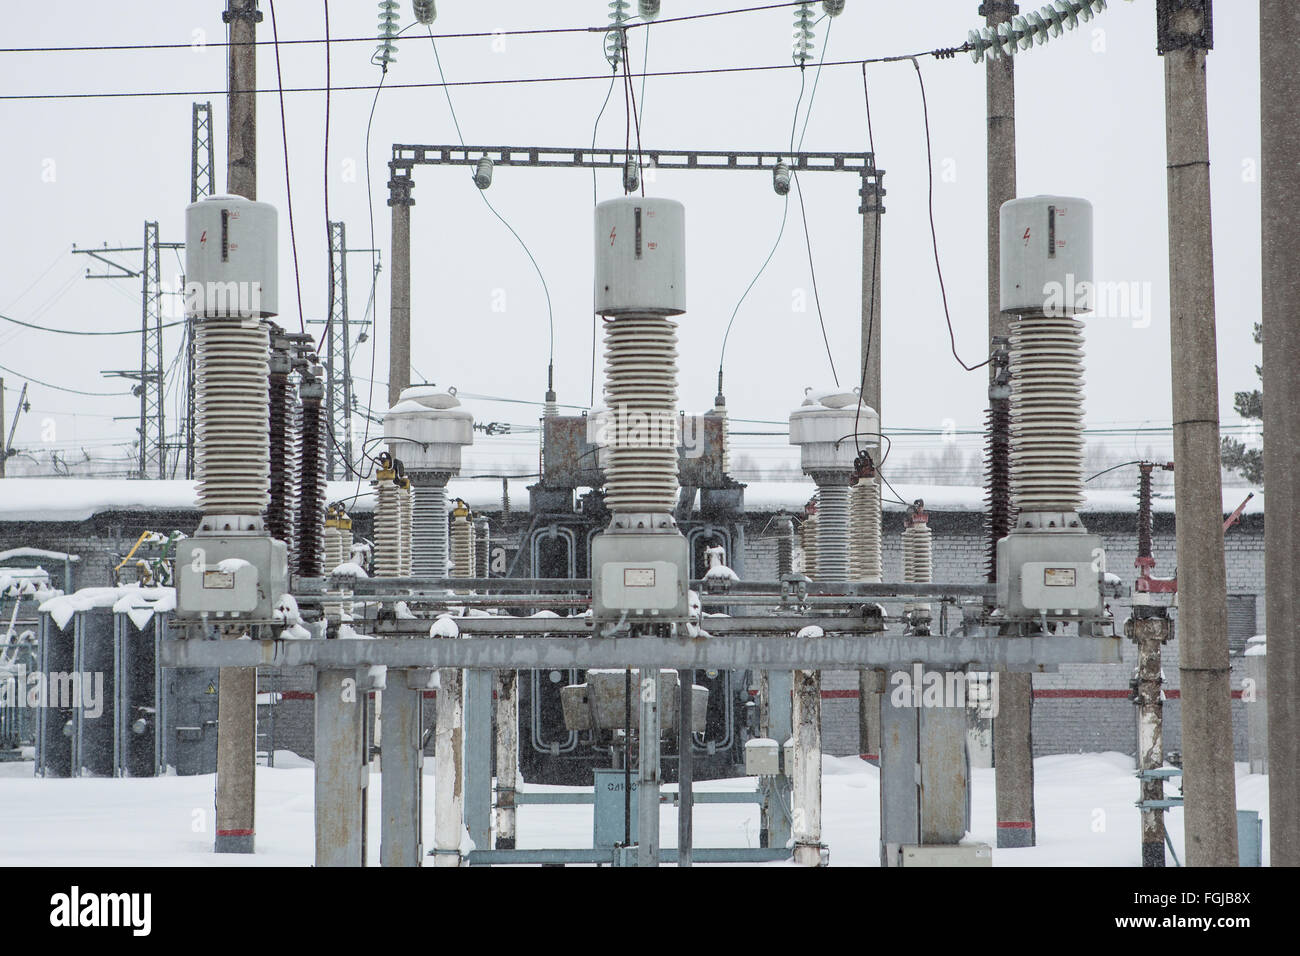 High voltage electric power substation in winter day Stock Photo